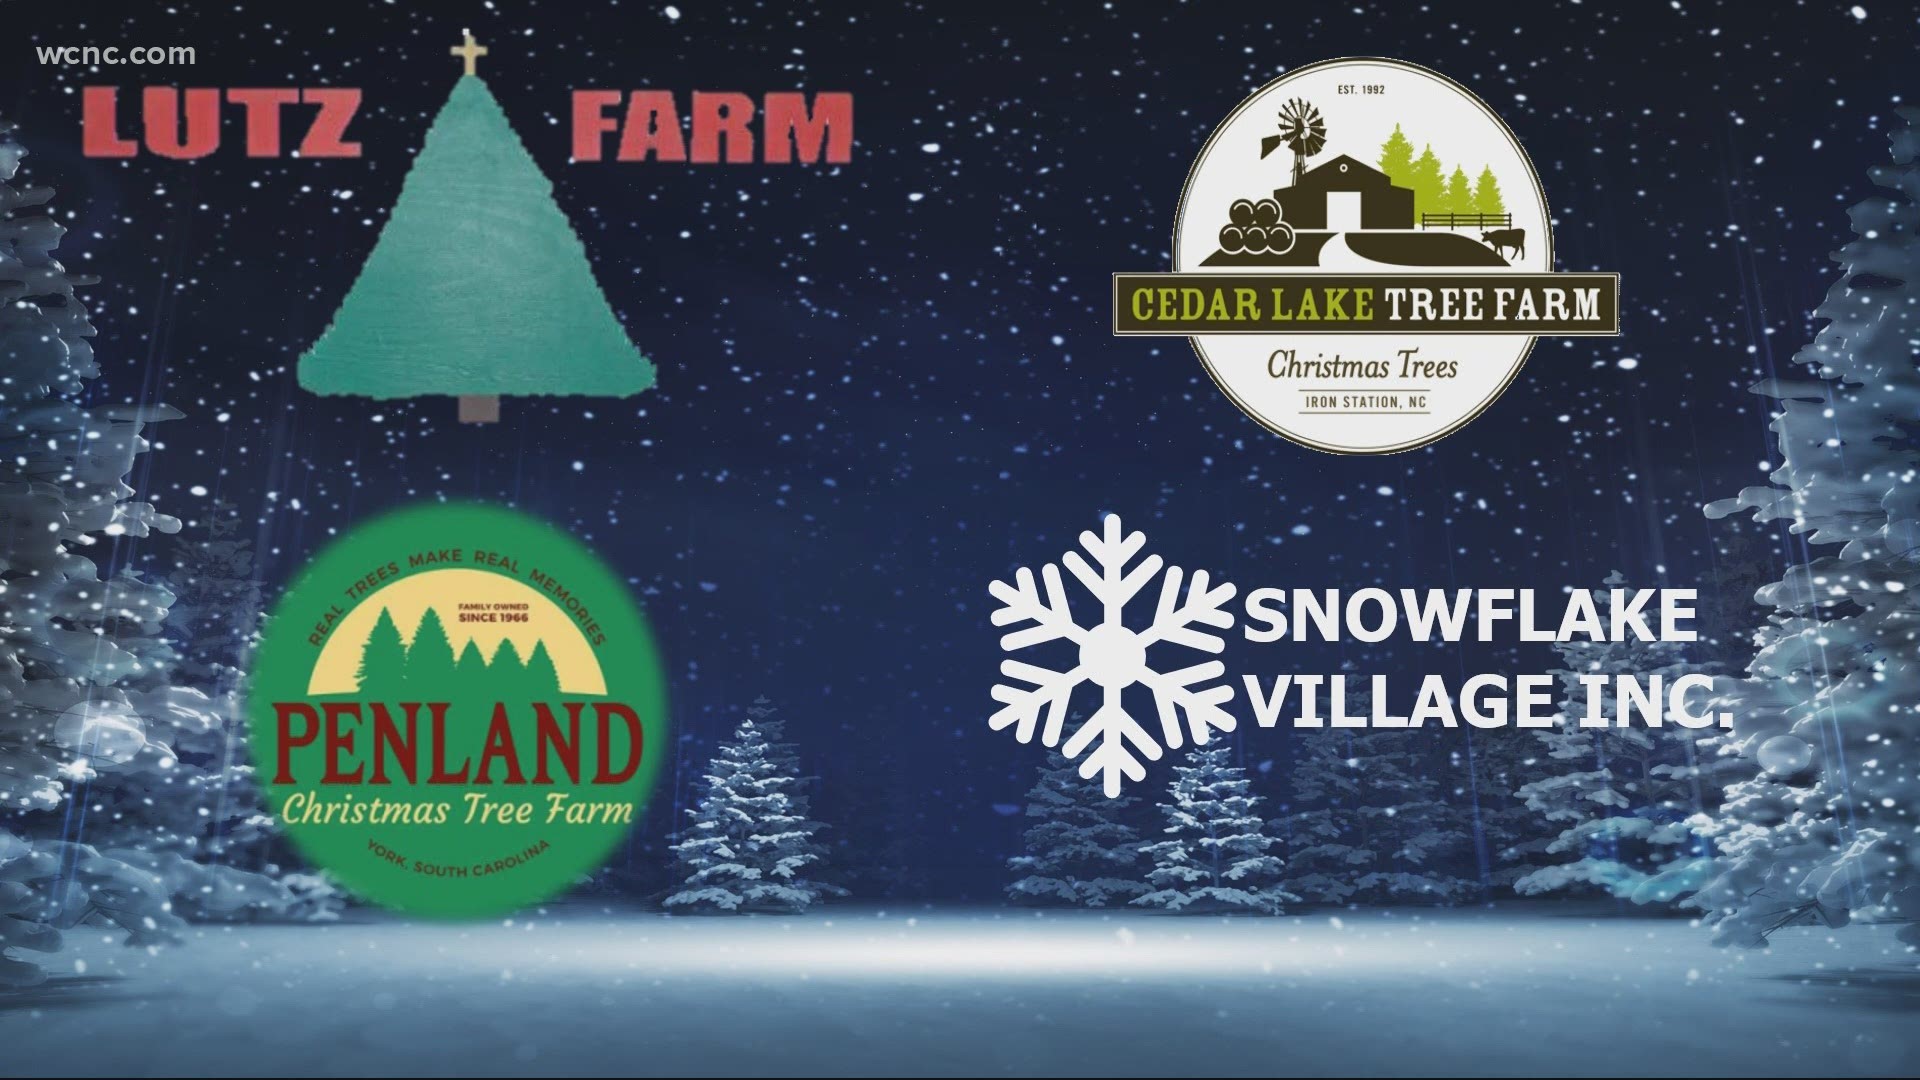 Some local tree farms have announced they have closed for season.